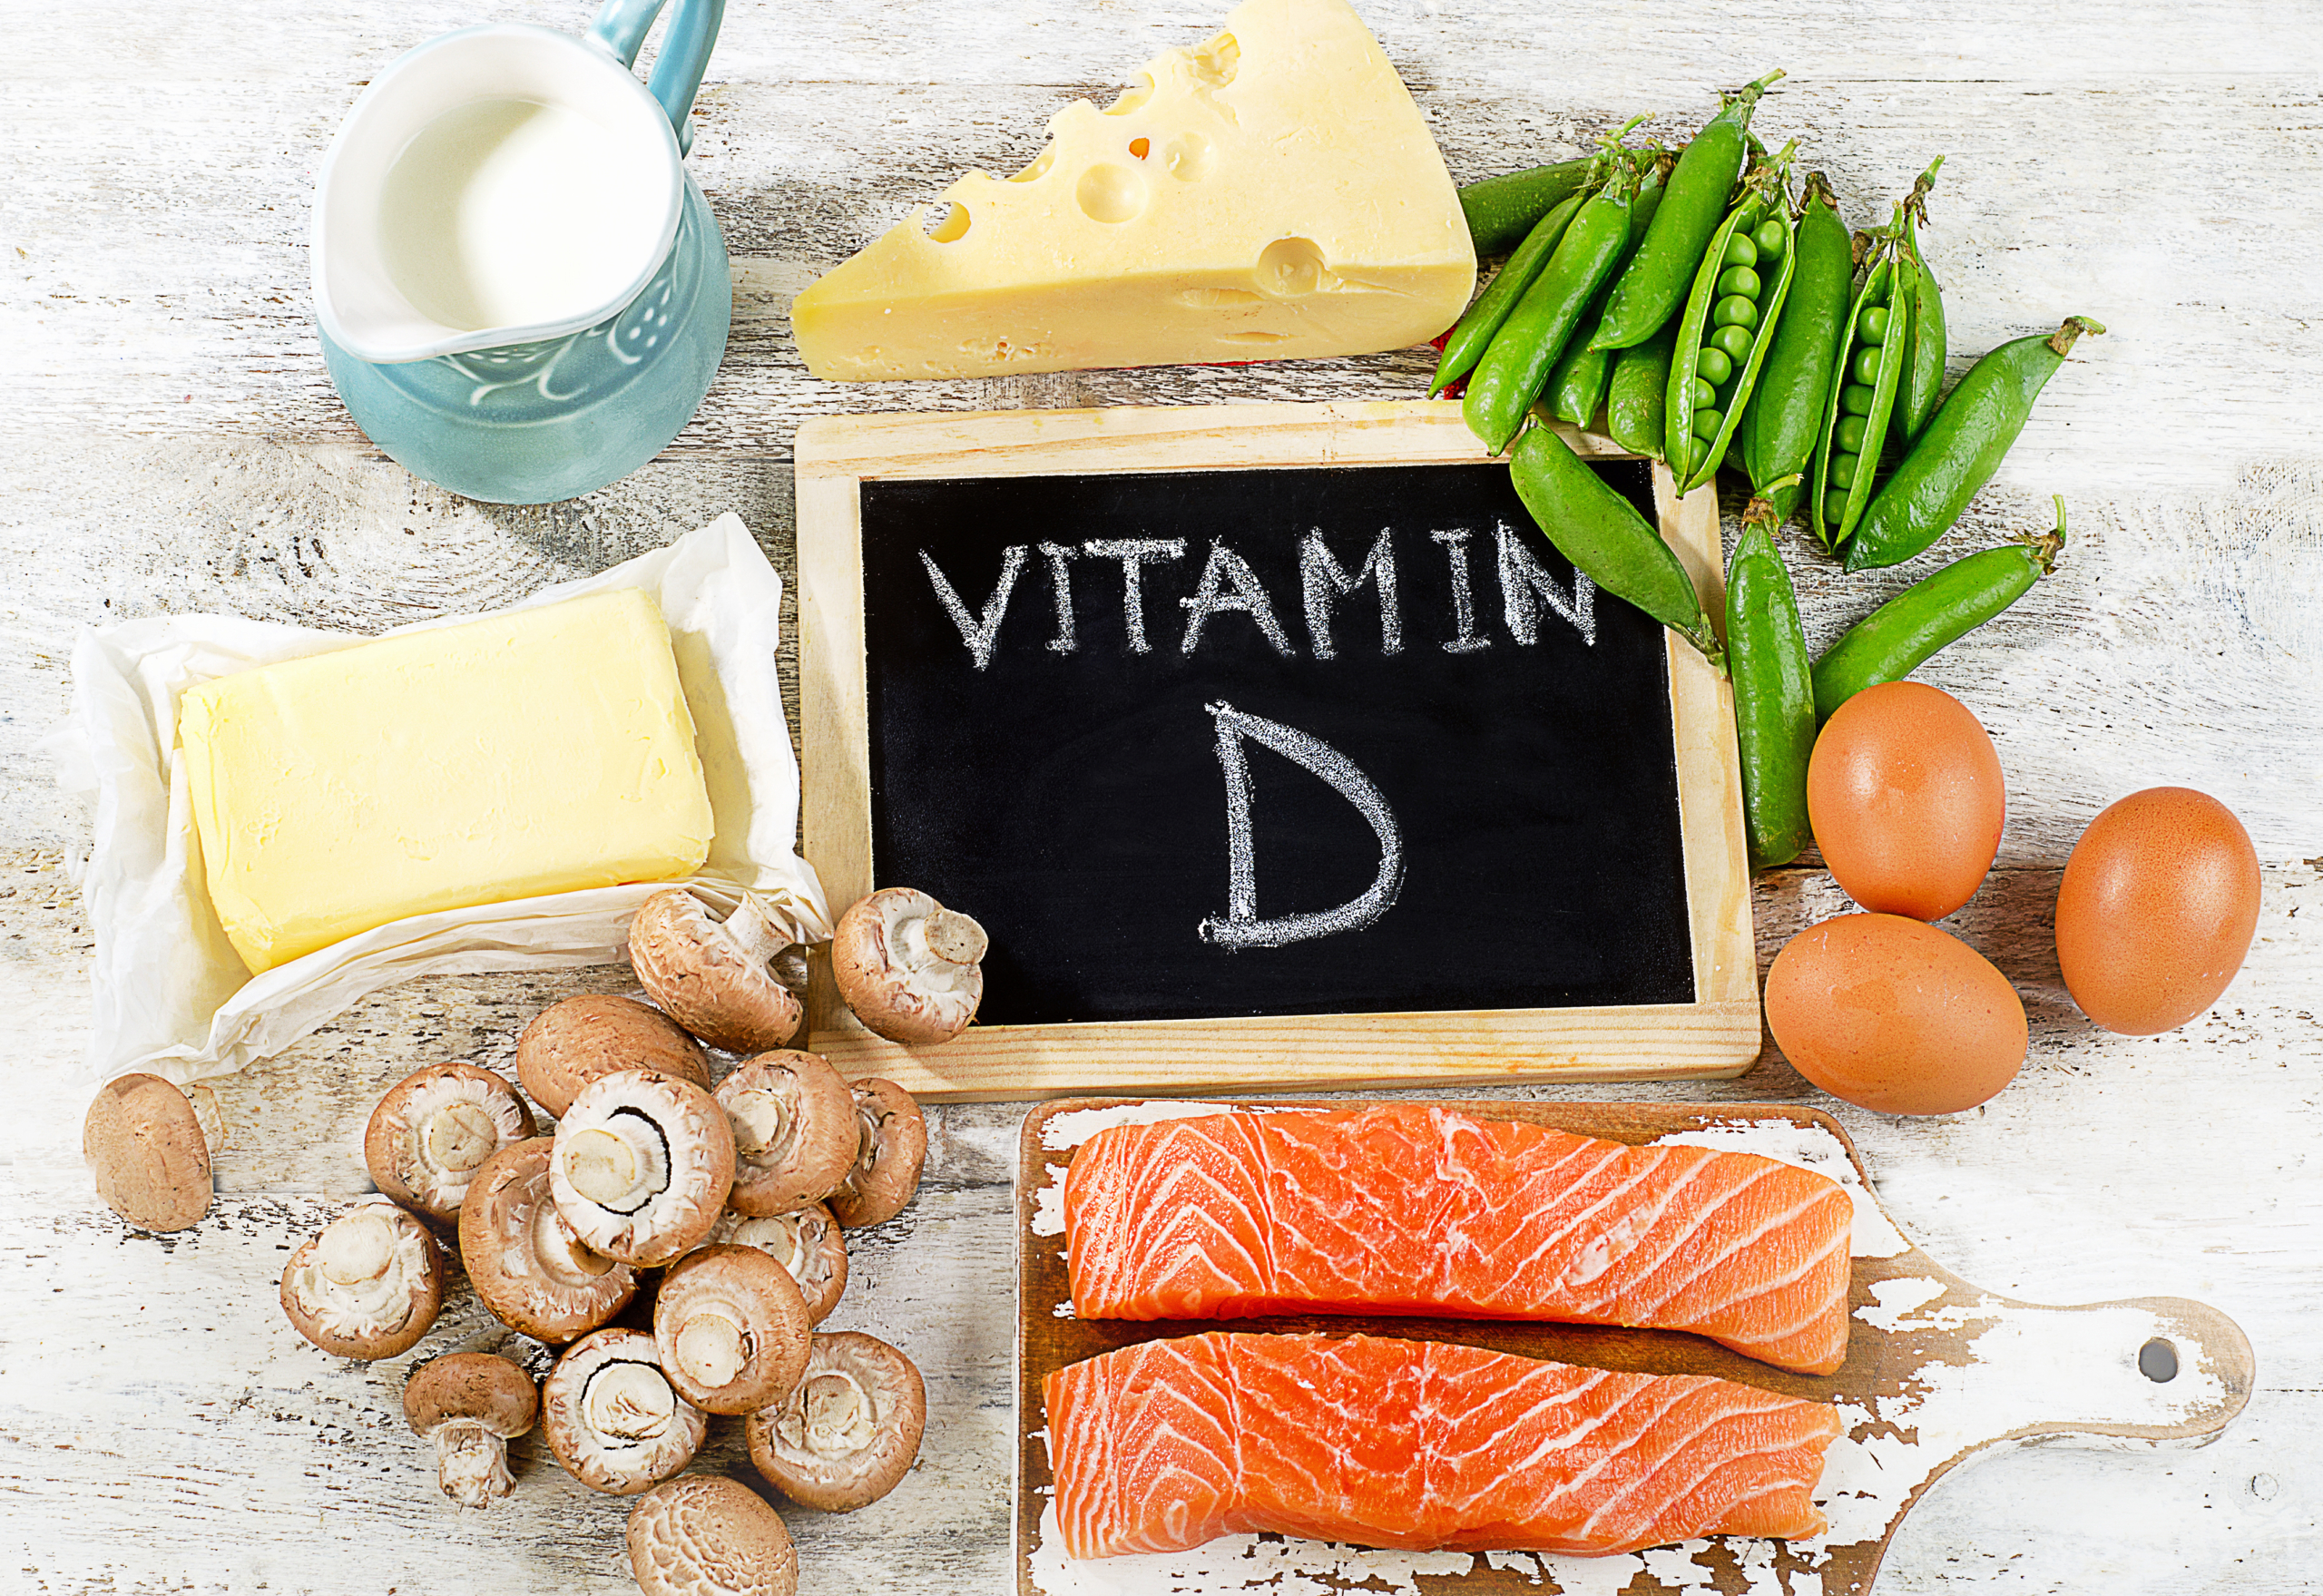 Vitamin D does appear to have several major benefits for athletic performance.